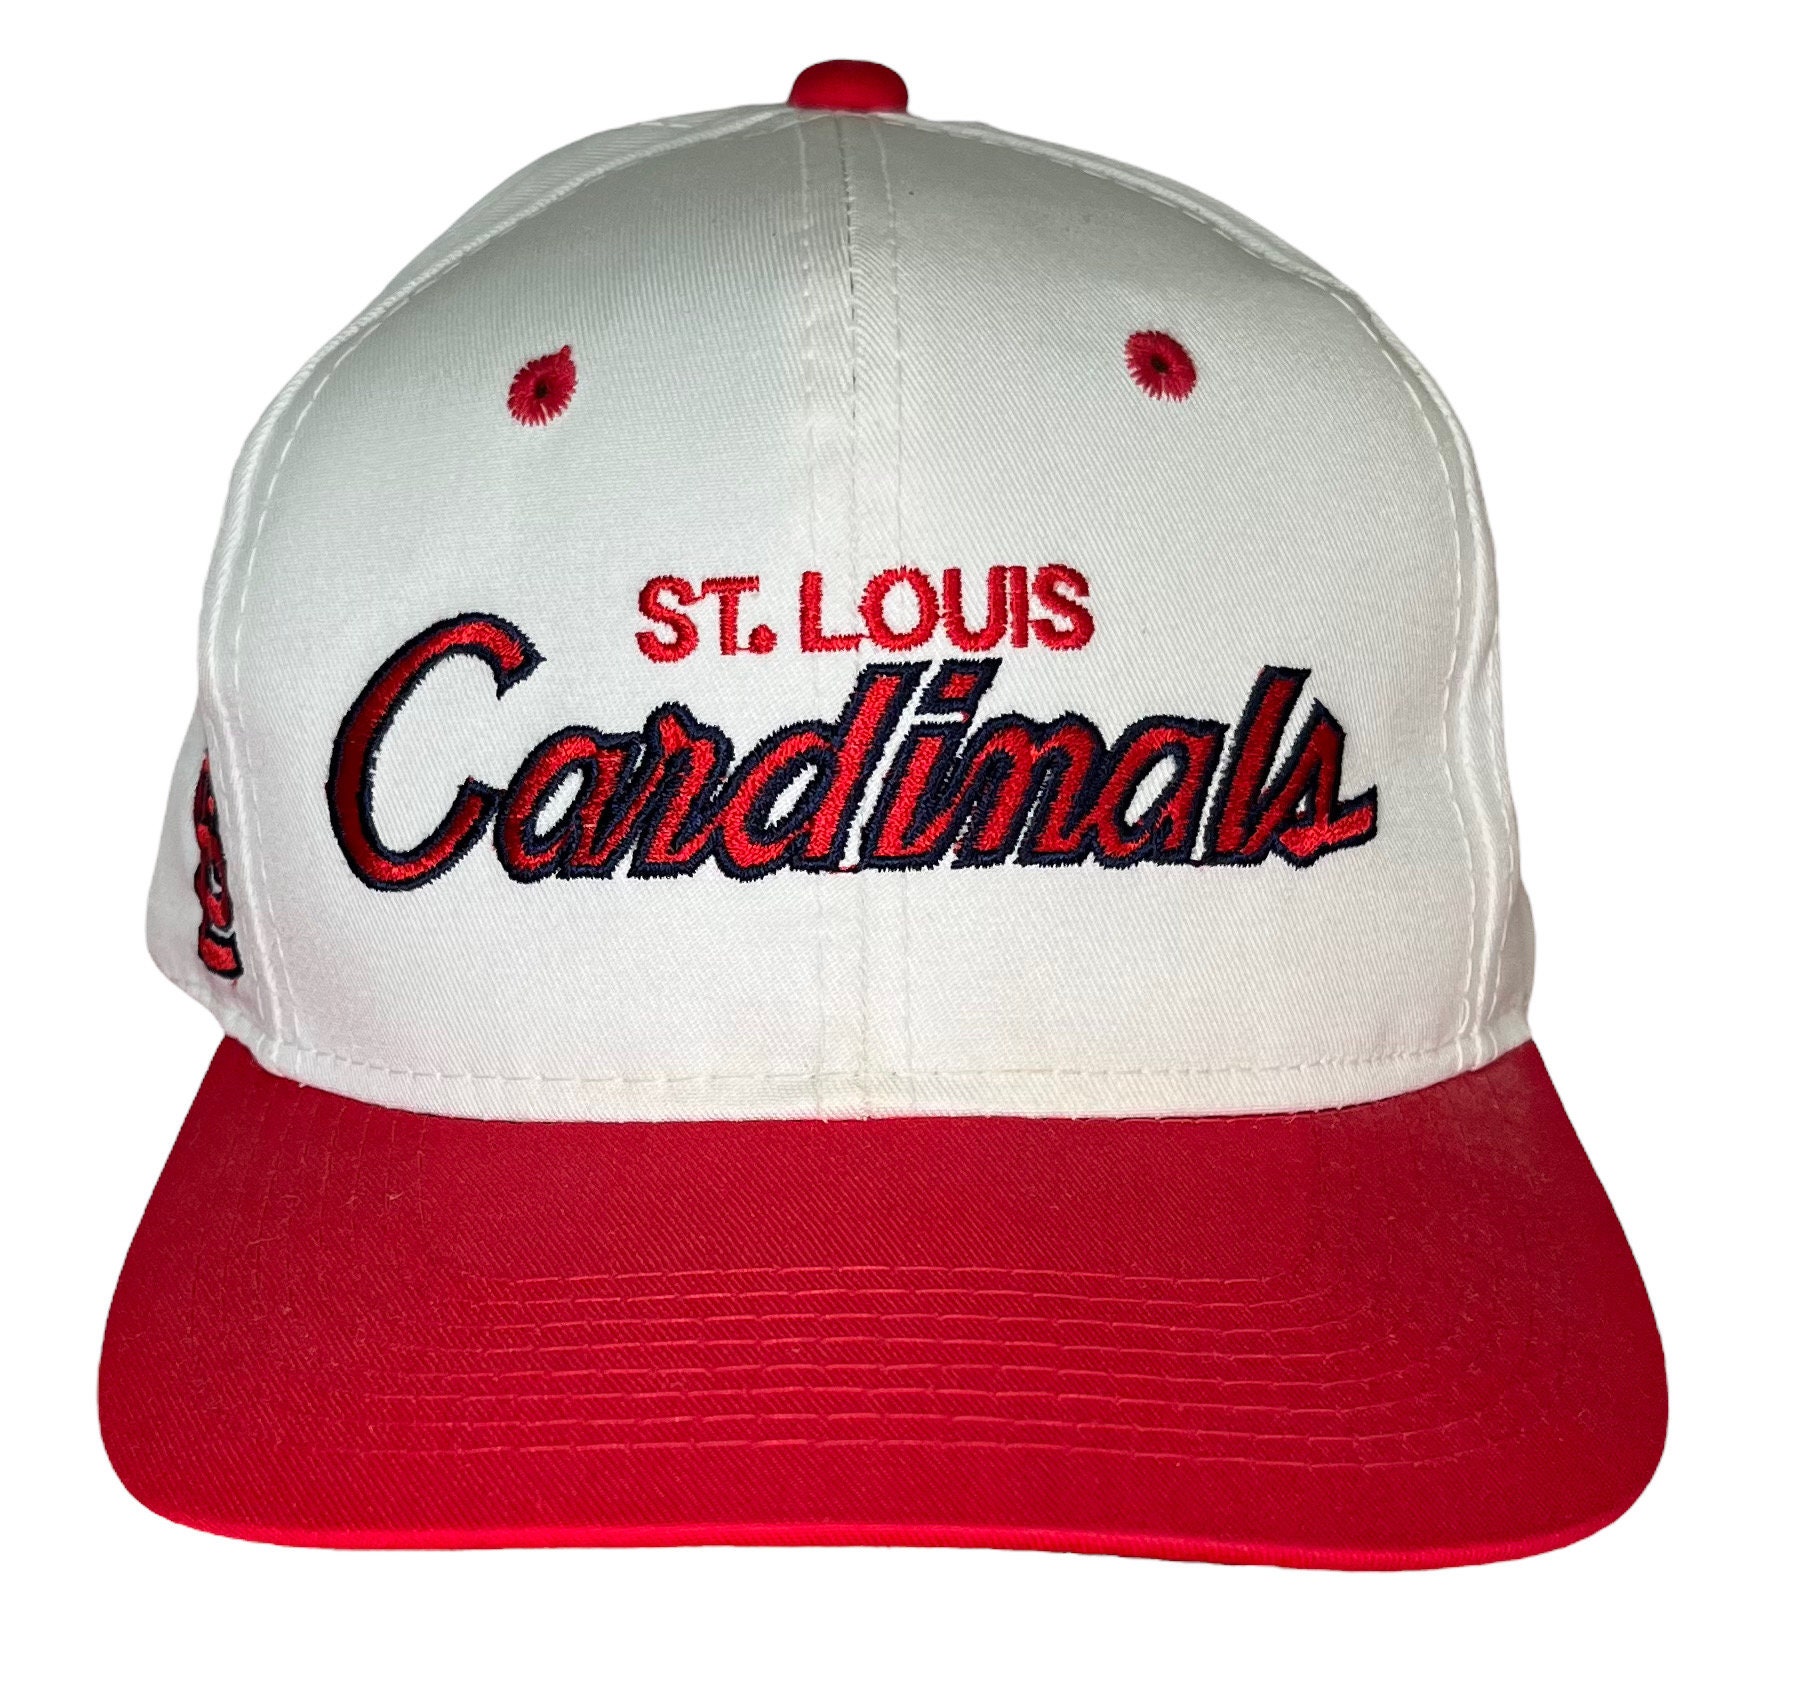 Youth Fan Favorite Red St. Louis Cardinals Basic Adjustable Hat - OSFA